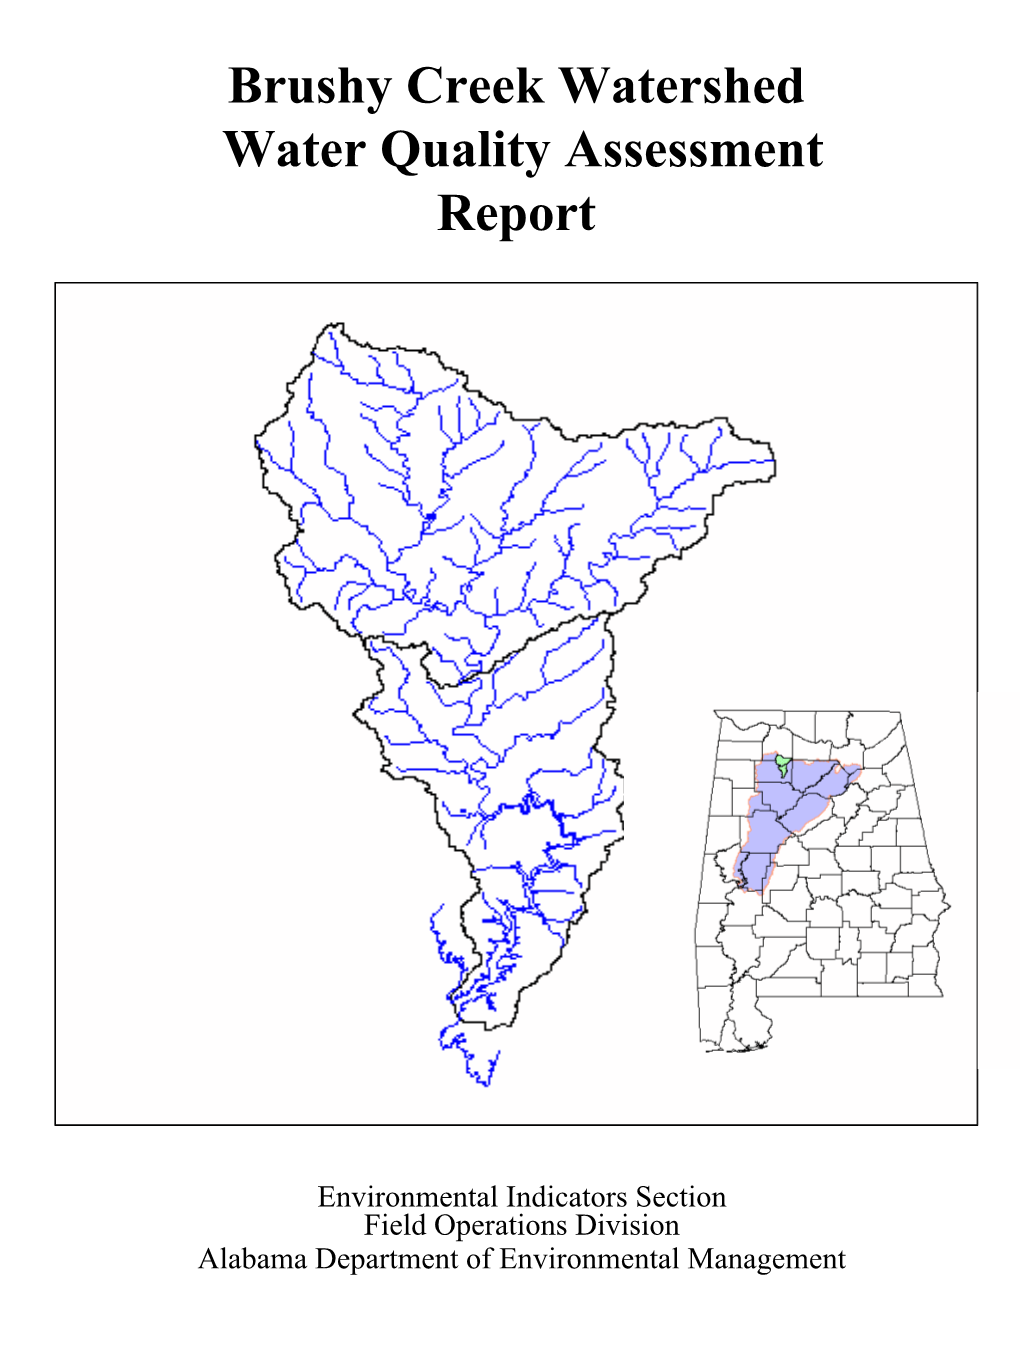 Brushy Creek Watershed Water Quality Assessment Report